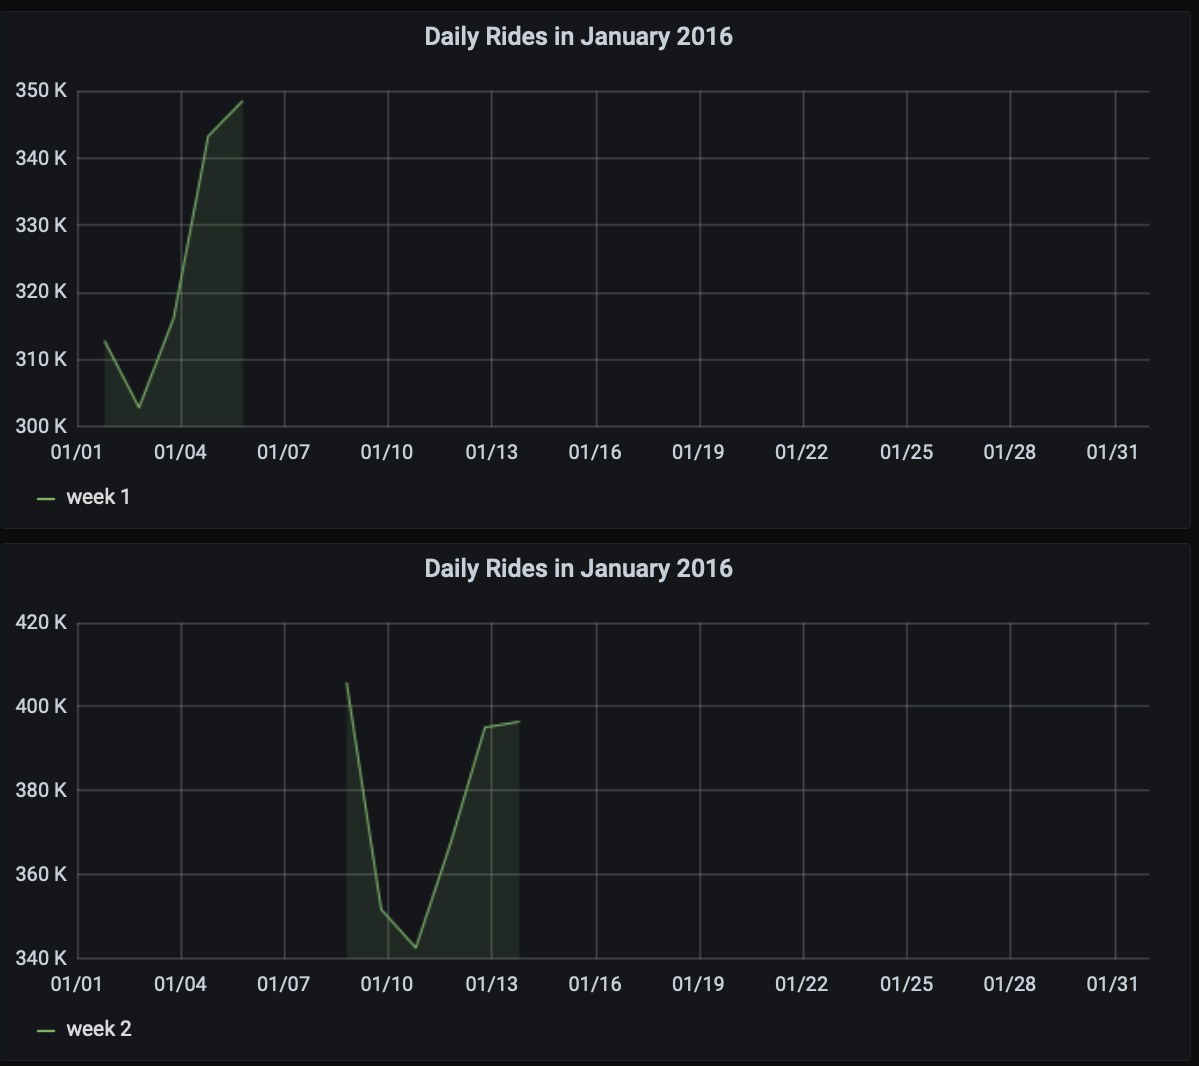 Two separate graphs showing rides for consecutive weeks in January 2016